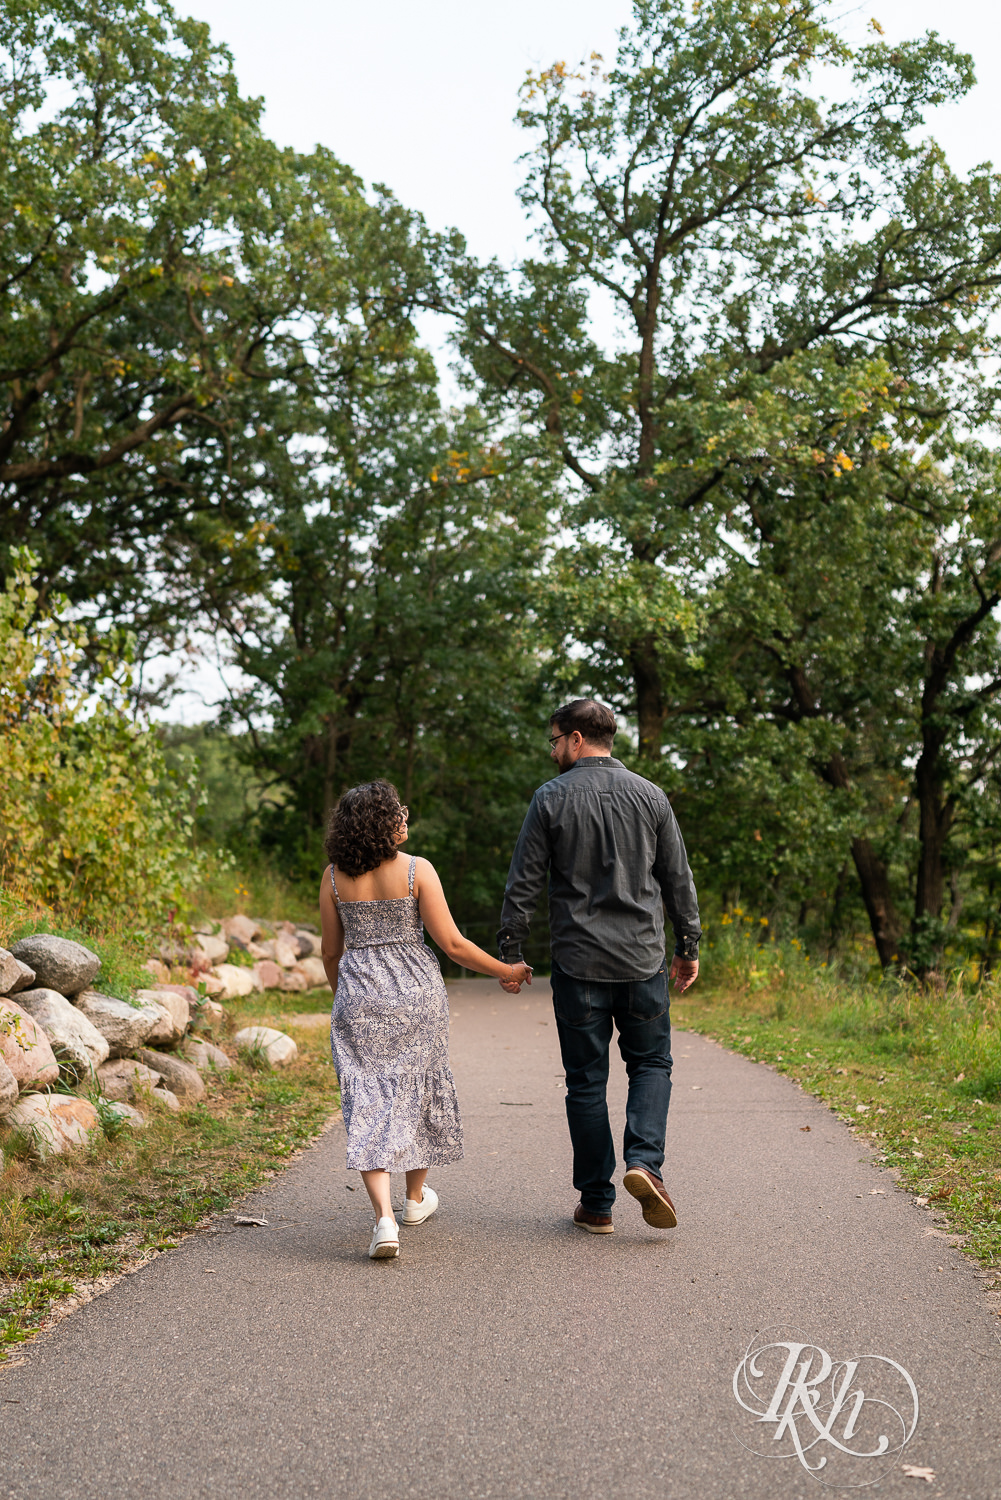 Man and woman walking down path holding hands.